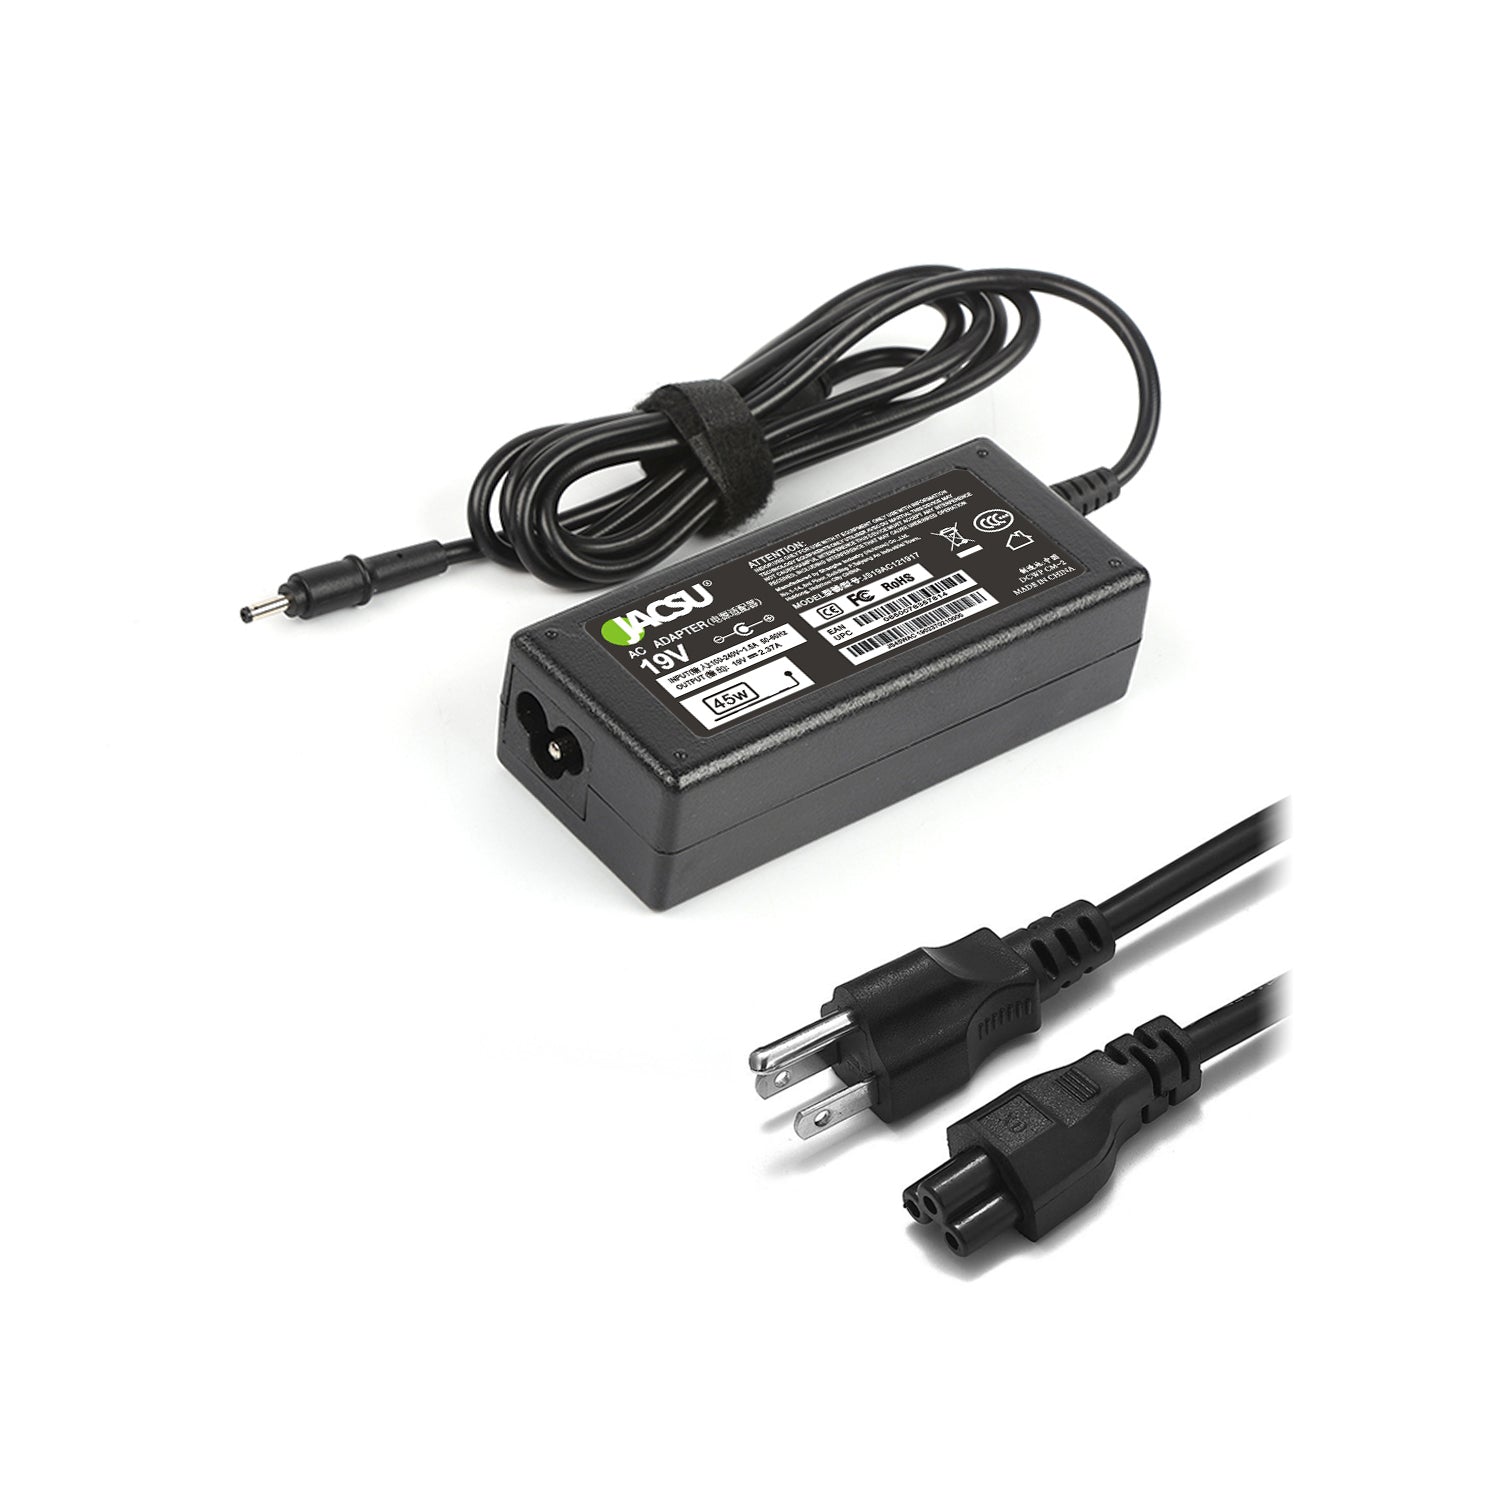 Jacsu 19V 2.37A 45W Pin Size 3.0x1.1 Laptop Ac Power Adapter Charger for Acer Aspire s7 391 V3-371 ES1-512-P84G